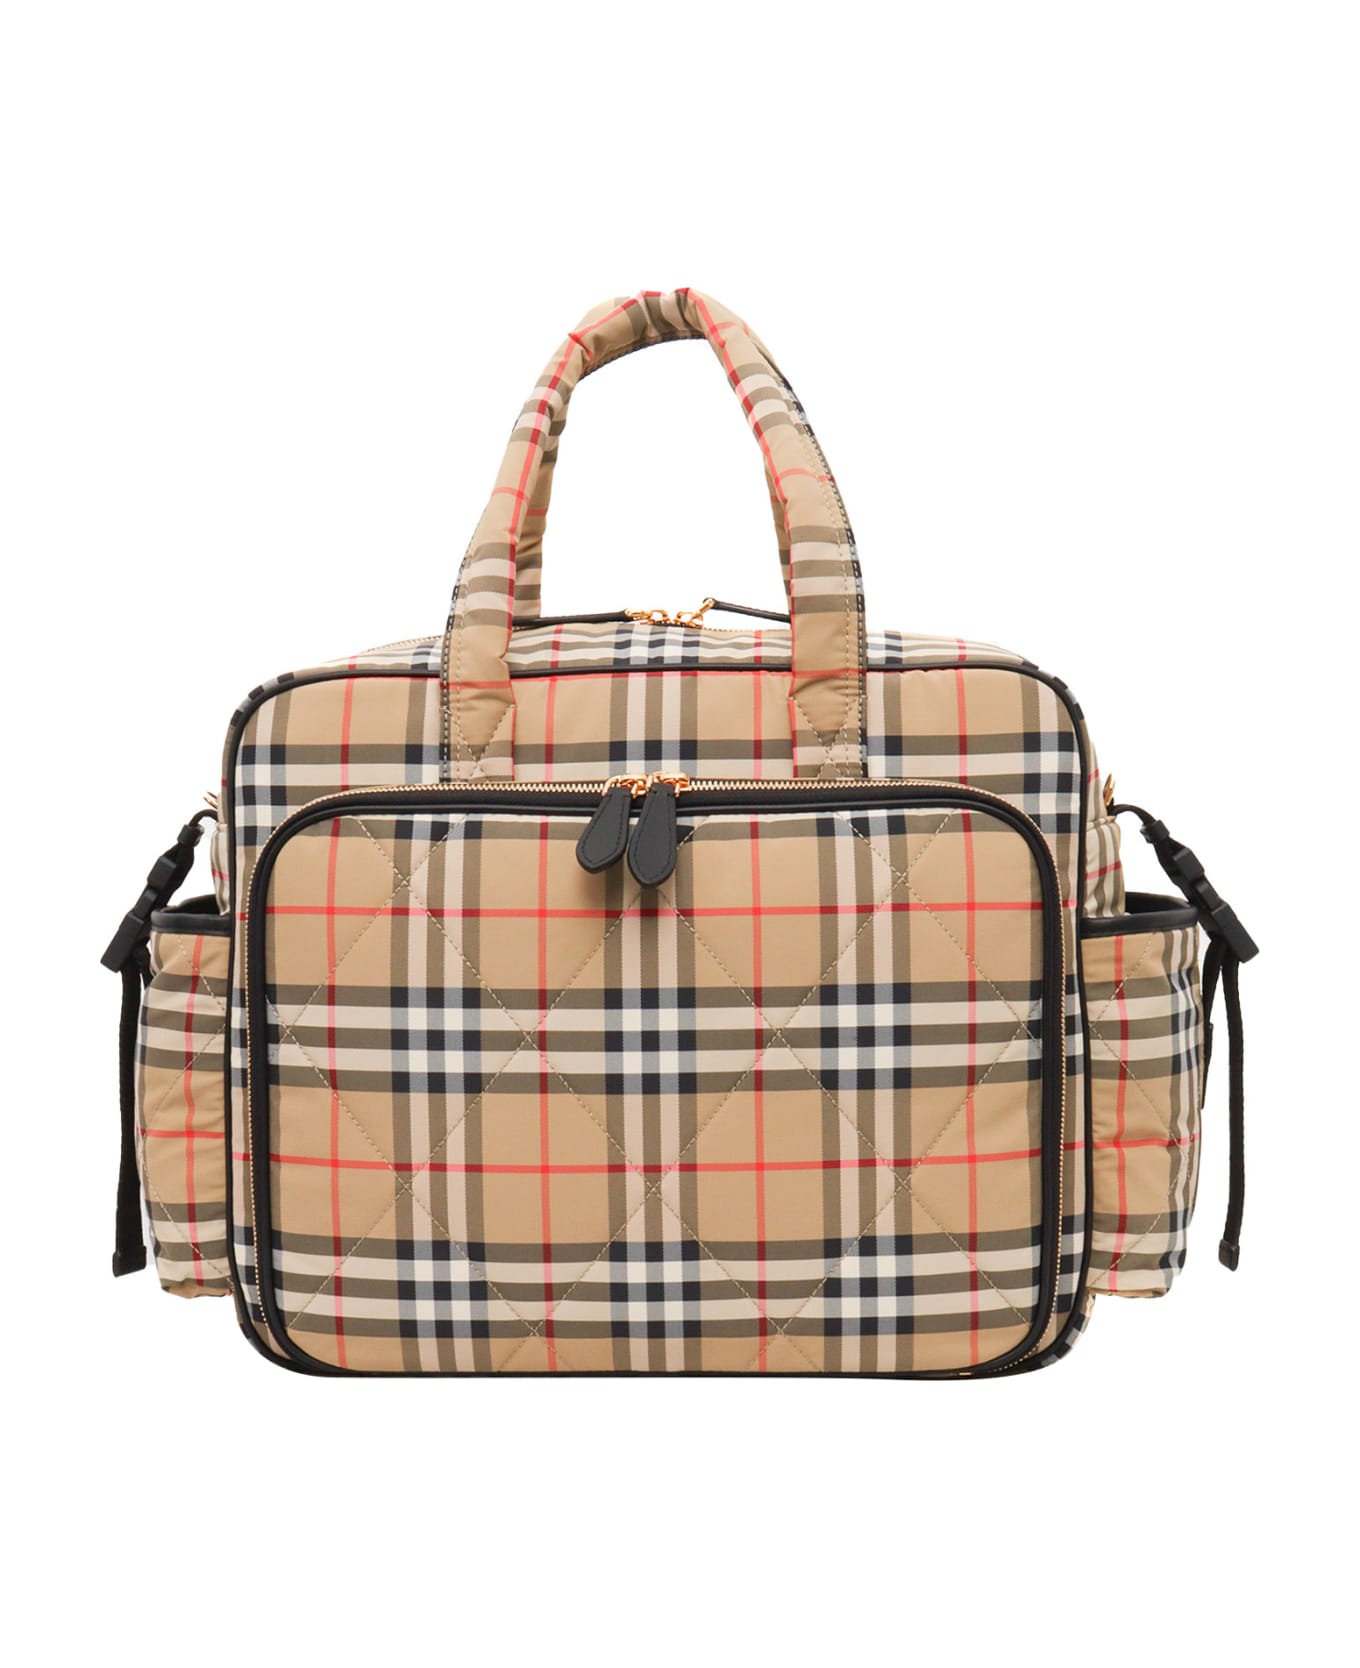 Burberry Check Pattern Bag - BEIGE